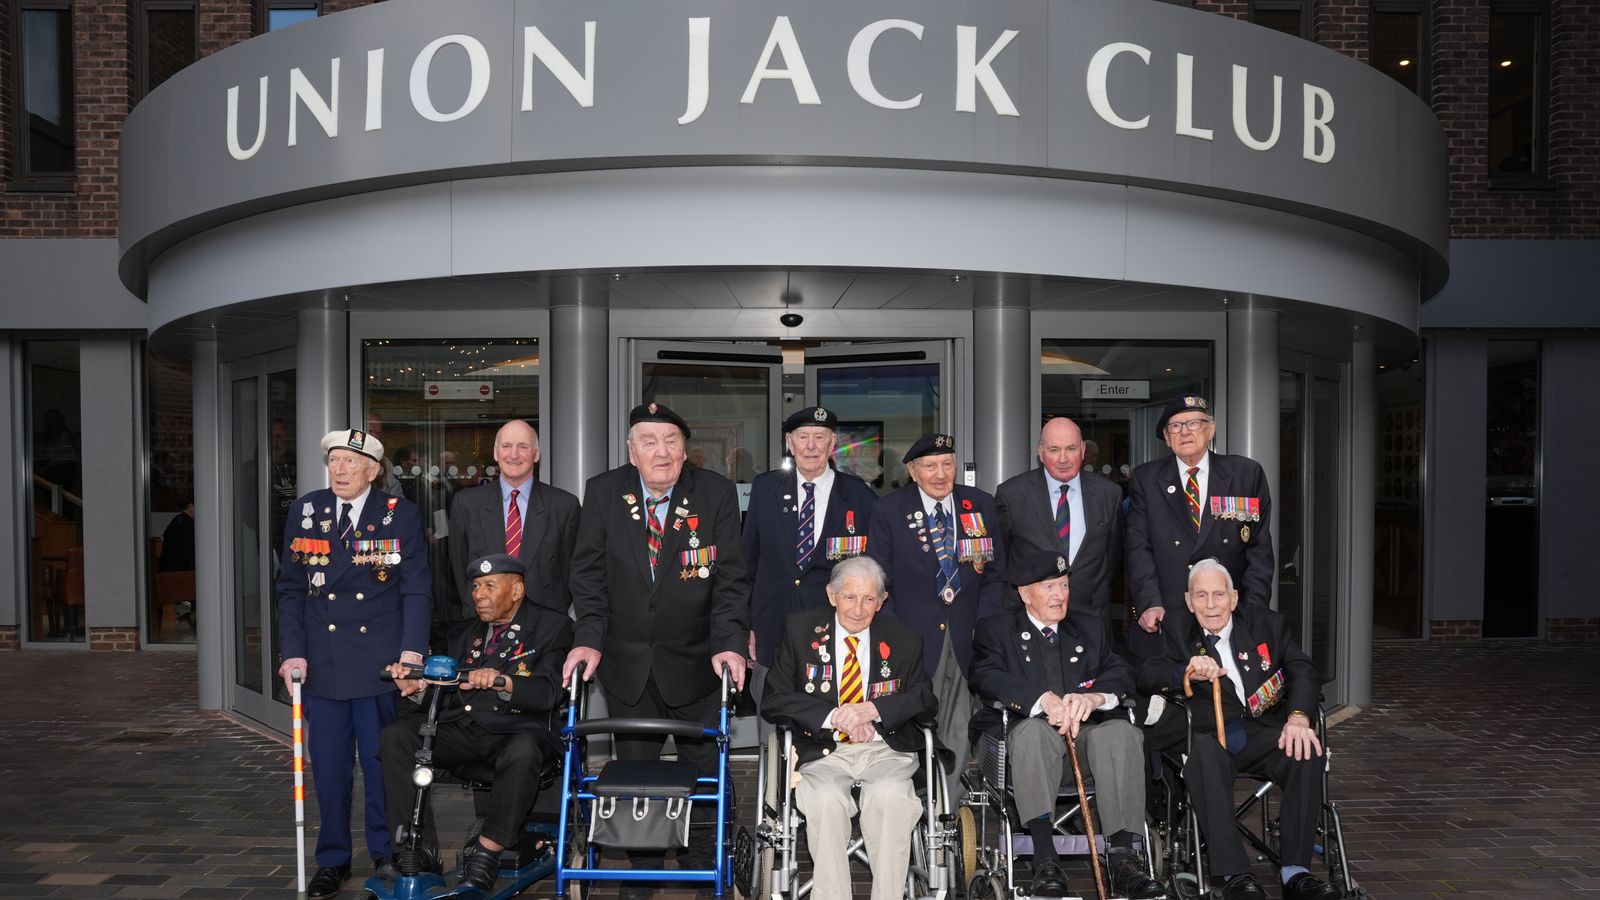 wwii veterans discuss d-day in what could be last time to share 'living history' with schoolchildren